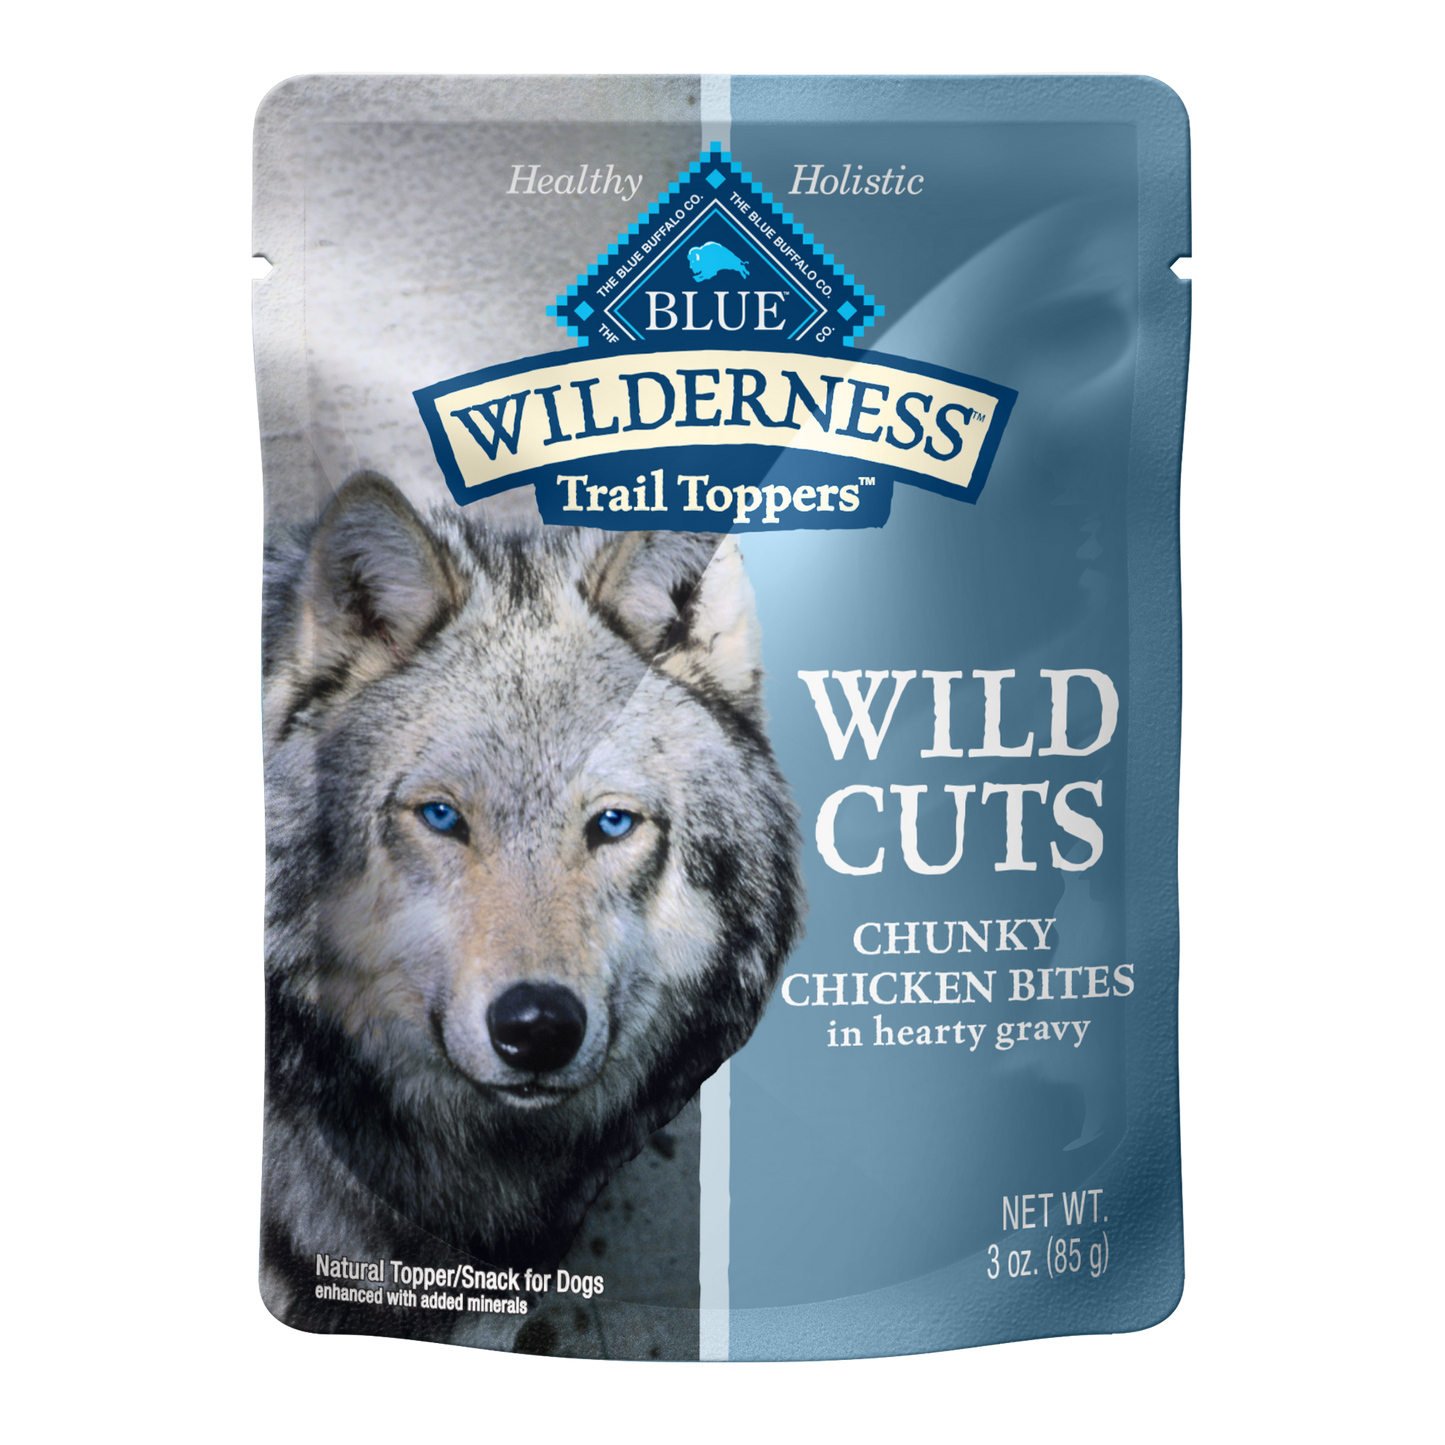 Blue Buffalo Wilderness Trail Toppers Wild Cuts High Protein, Natural Wet Dog Food, Chunky Chicken Bites in Hearty Gravy 3-oz pouches, Case of 24